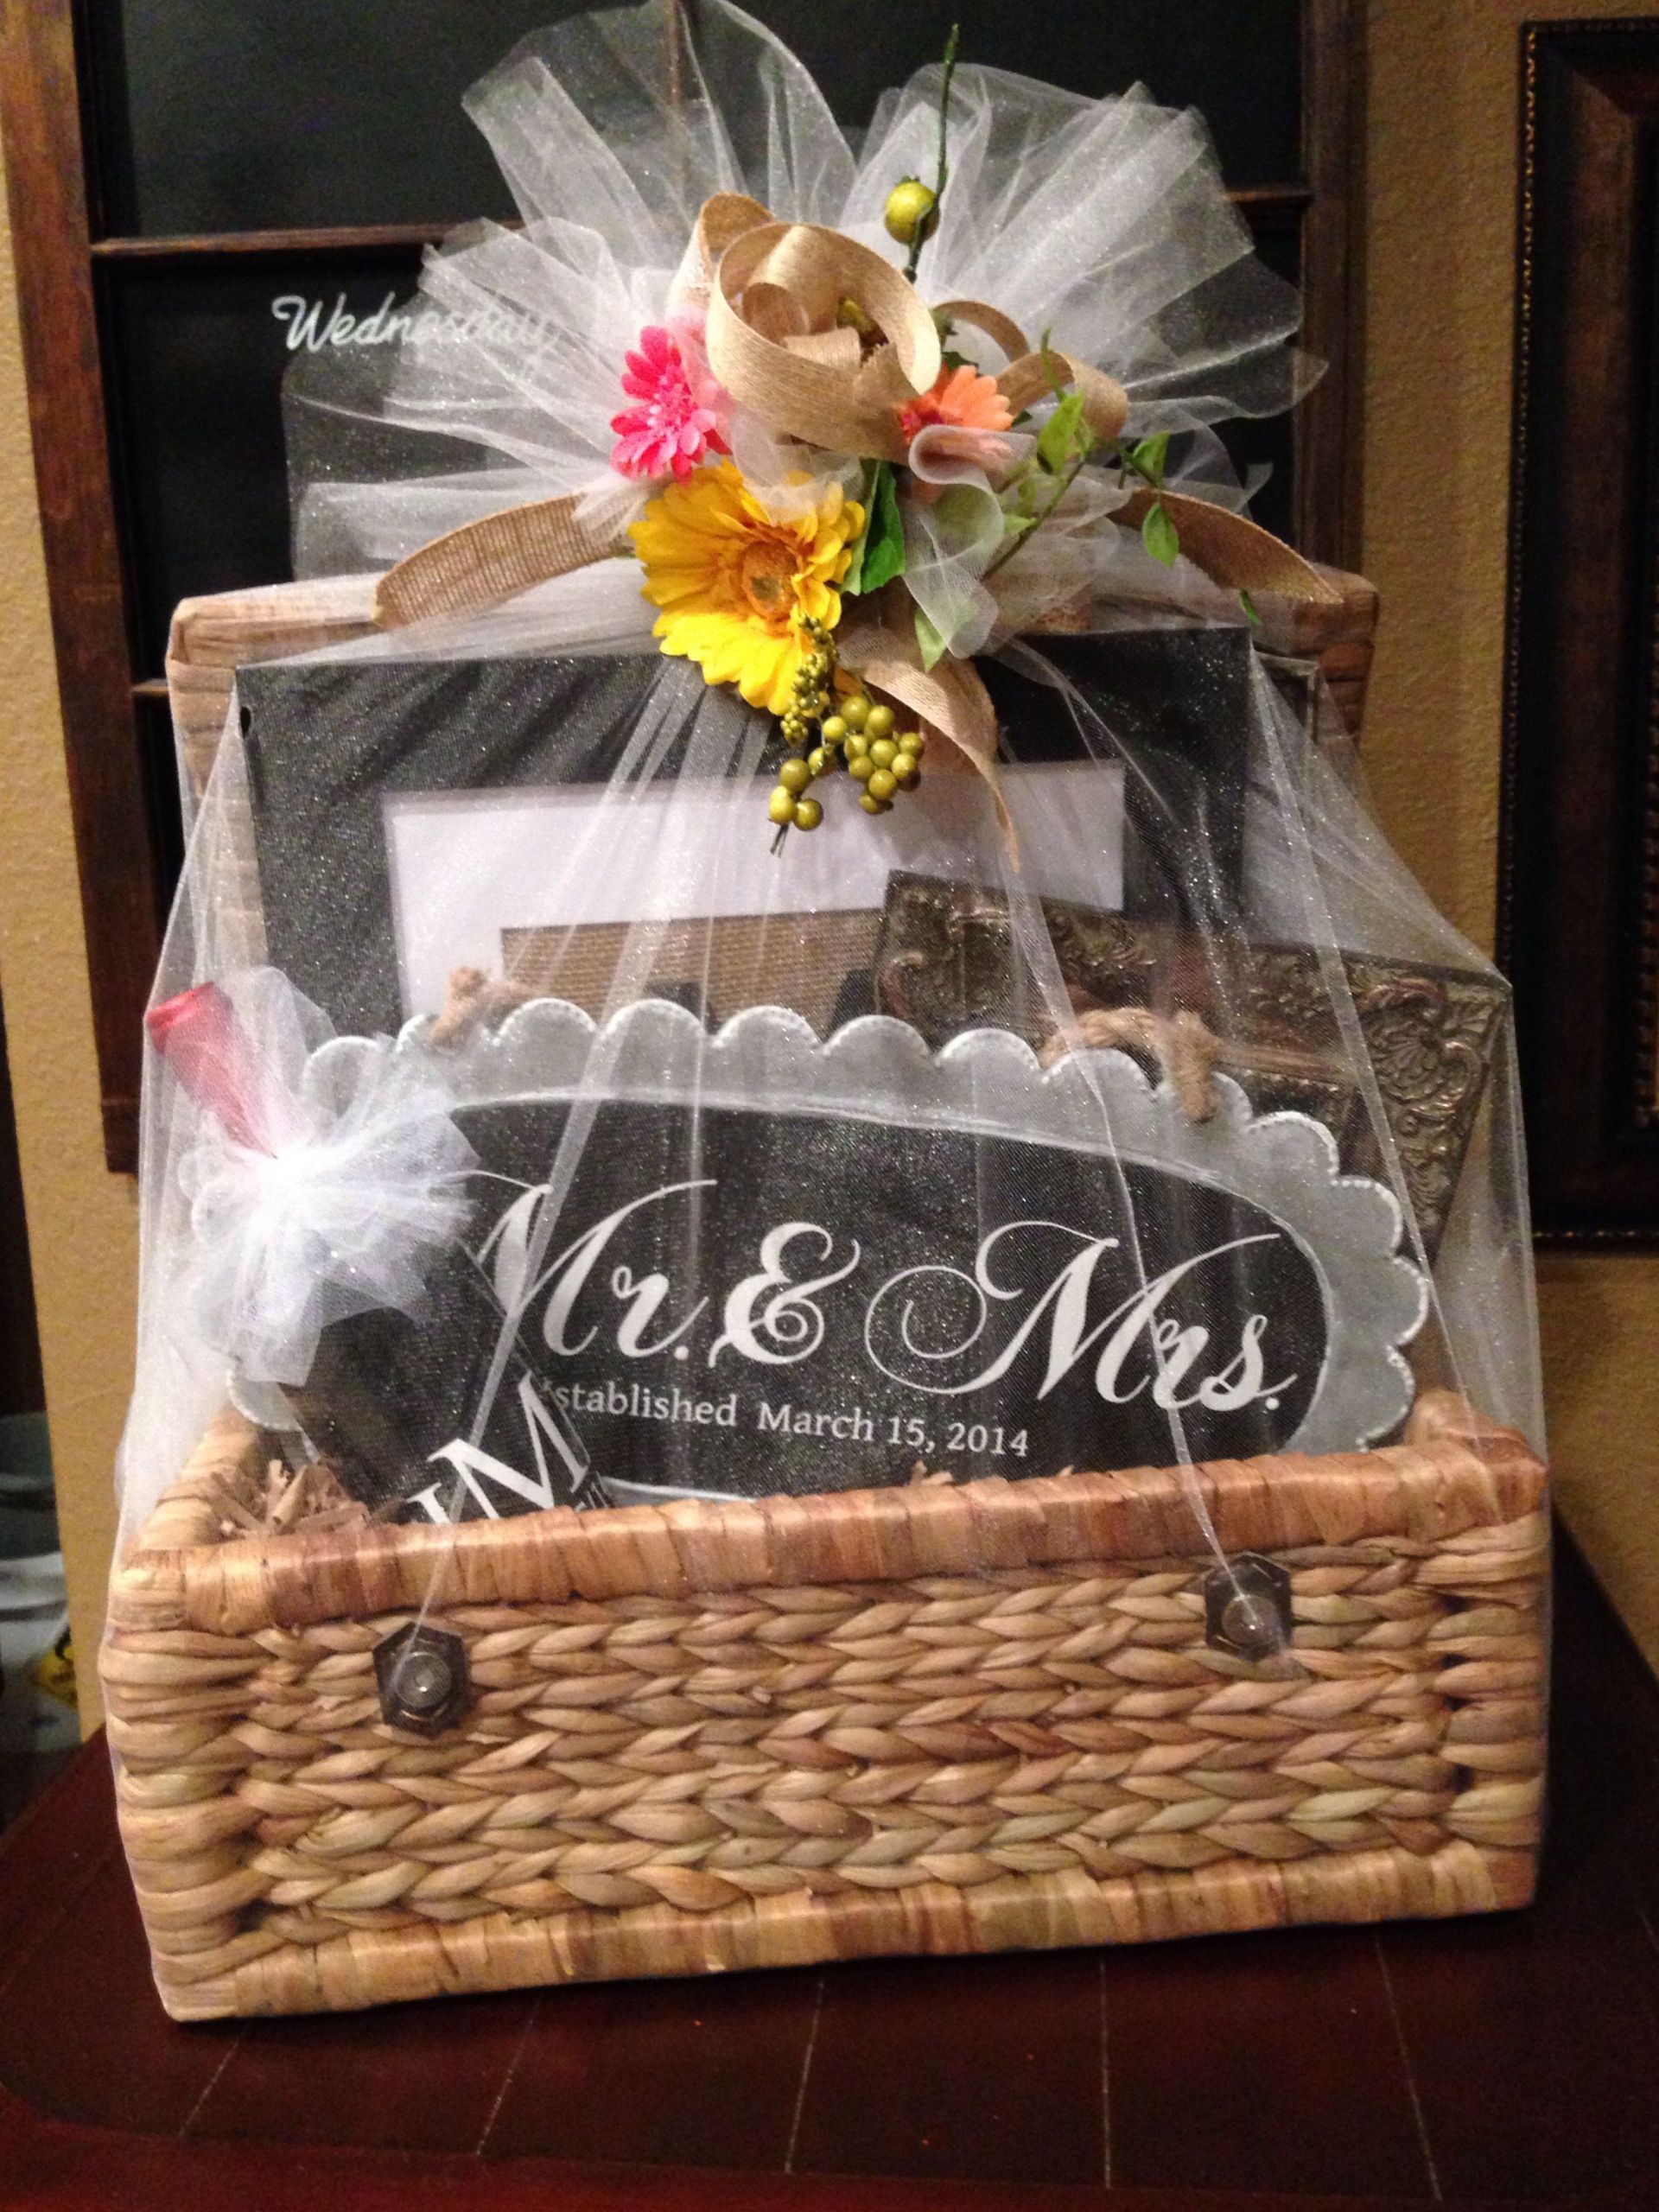 Unusual Wedding Gift Ideas
 Wedding t basket filed with personalized ts made